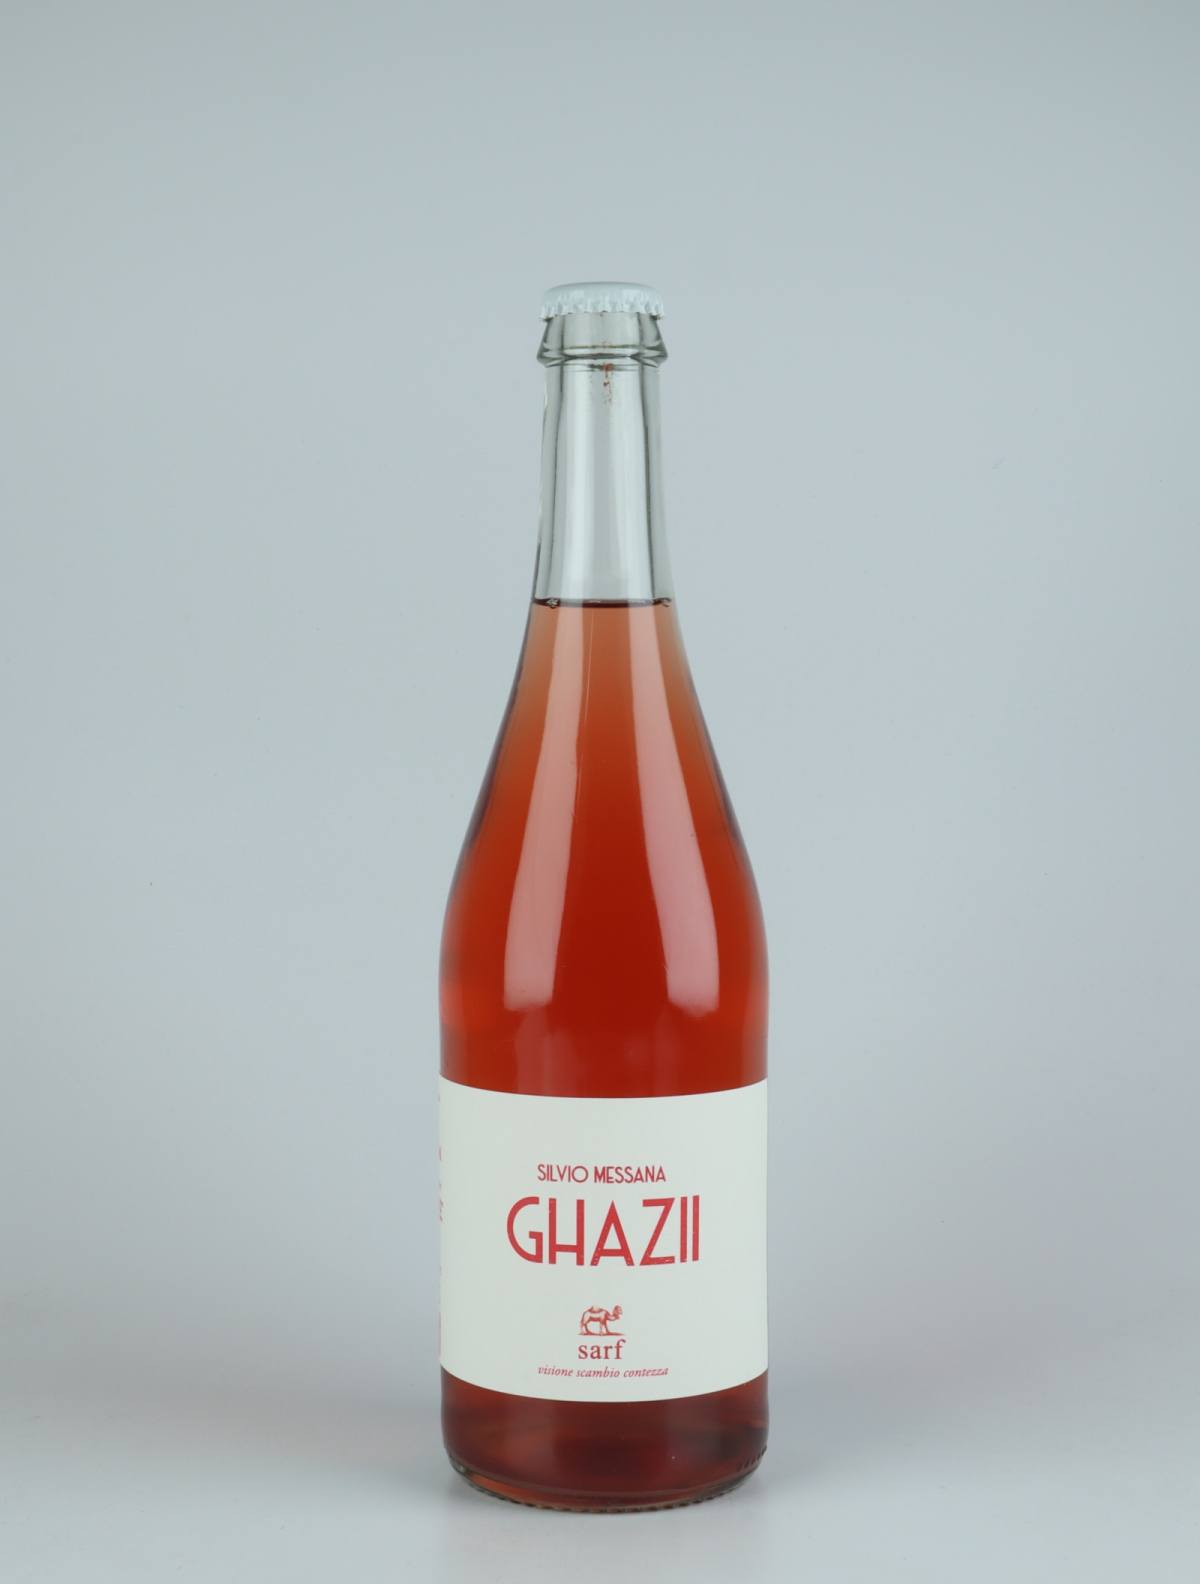 A bottle 2021 Ghazii Sparkling from Silvio Messana, Tuscany in Italy